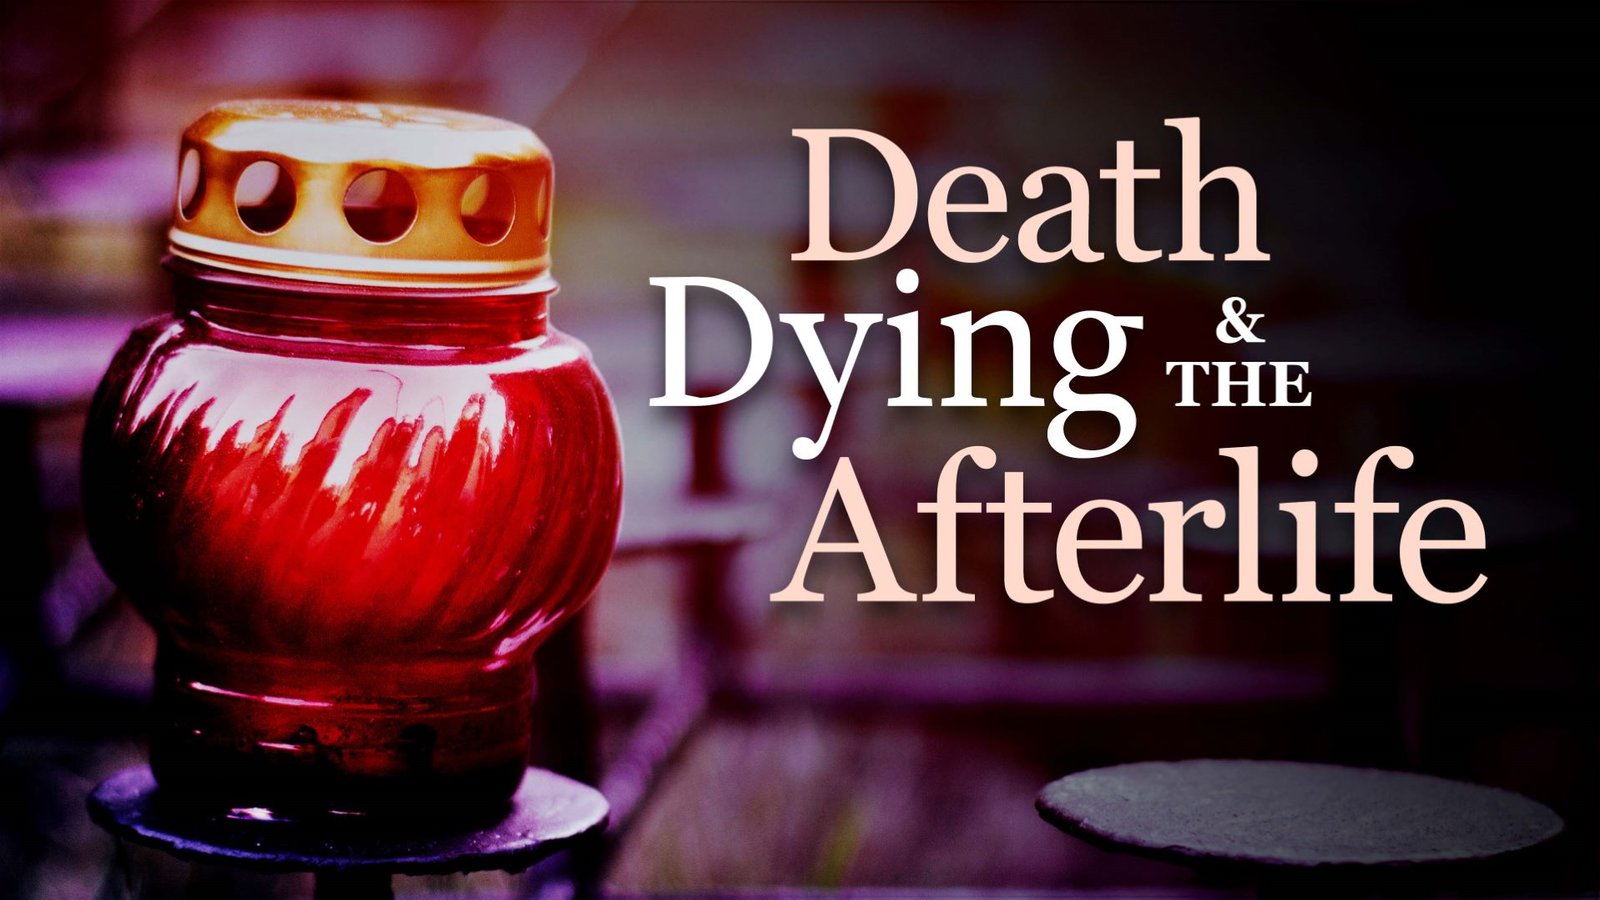 Death, Dying, and the Afterlife - Lessons from World Cultures